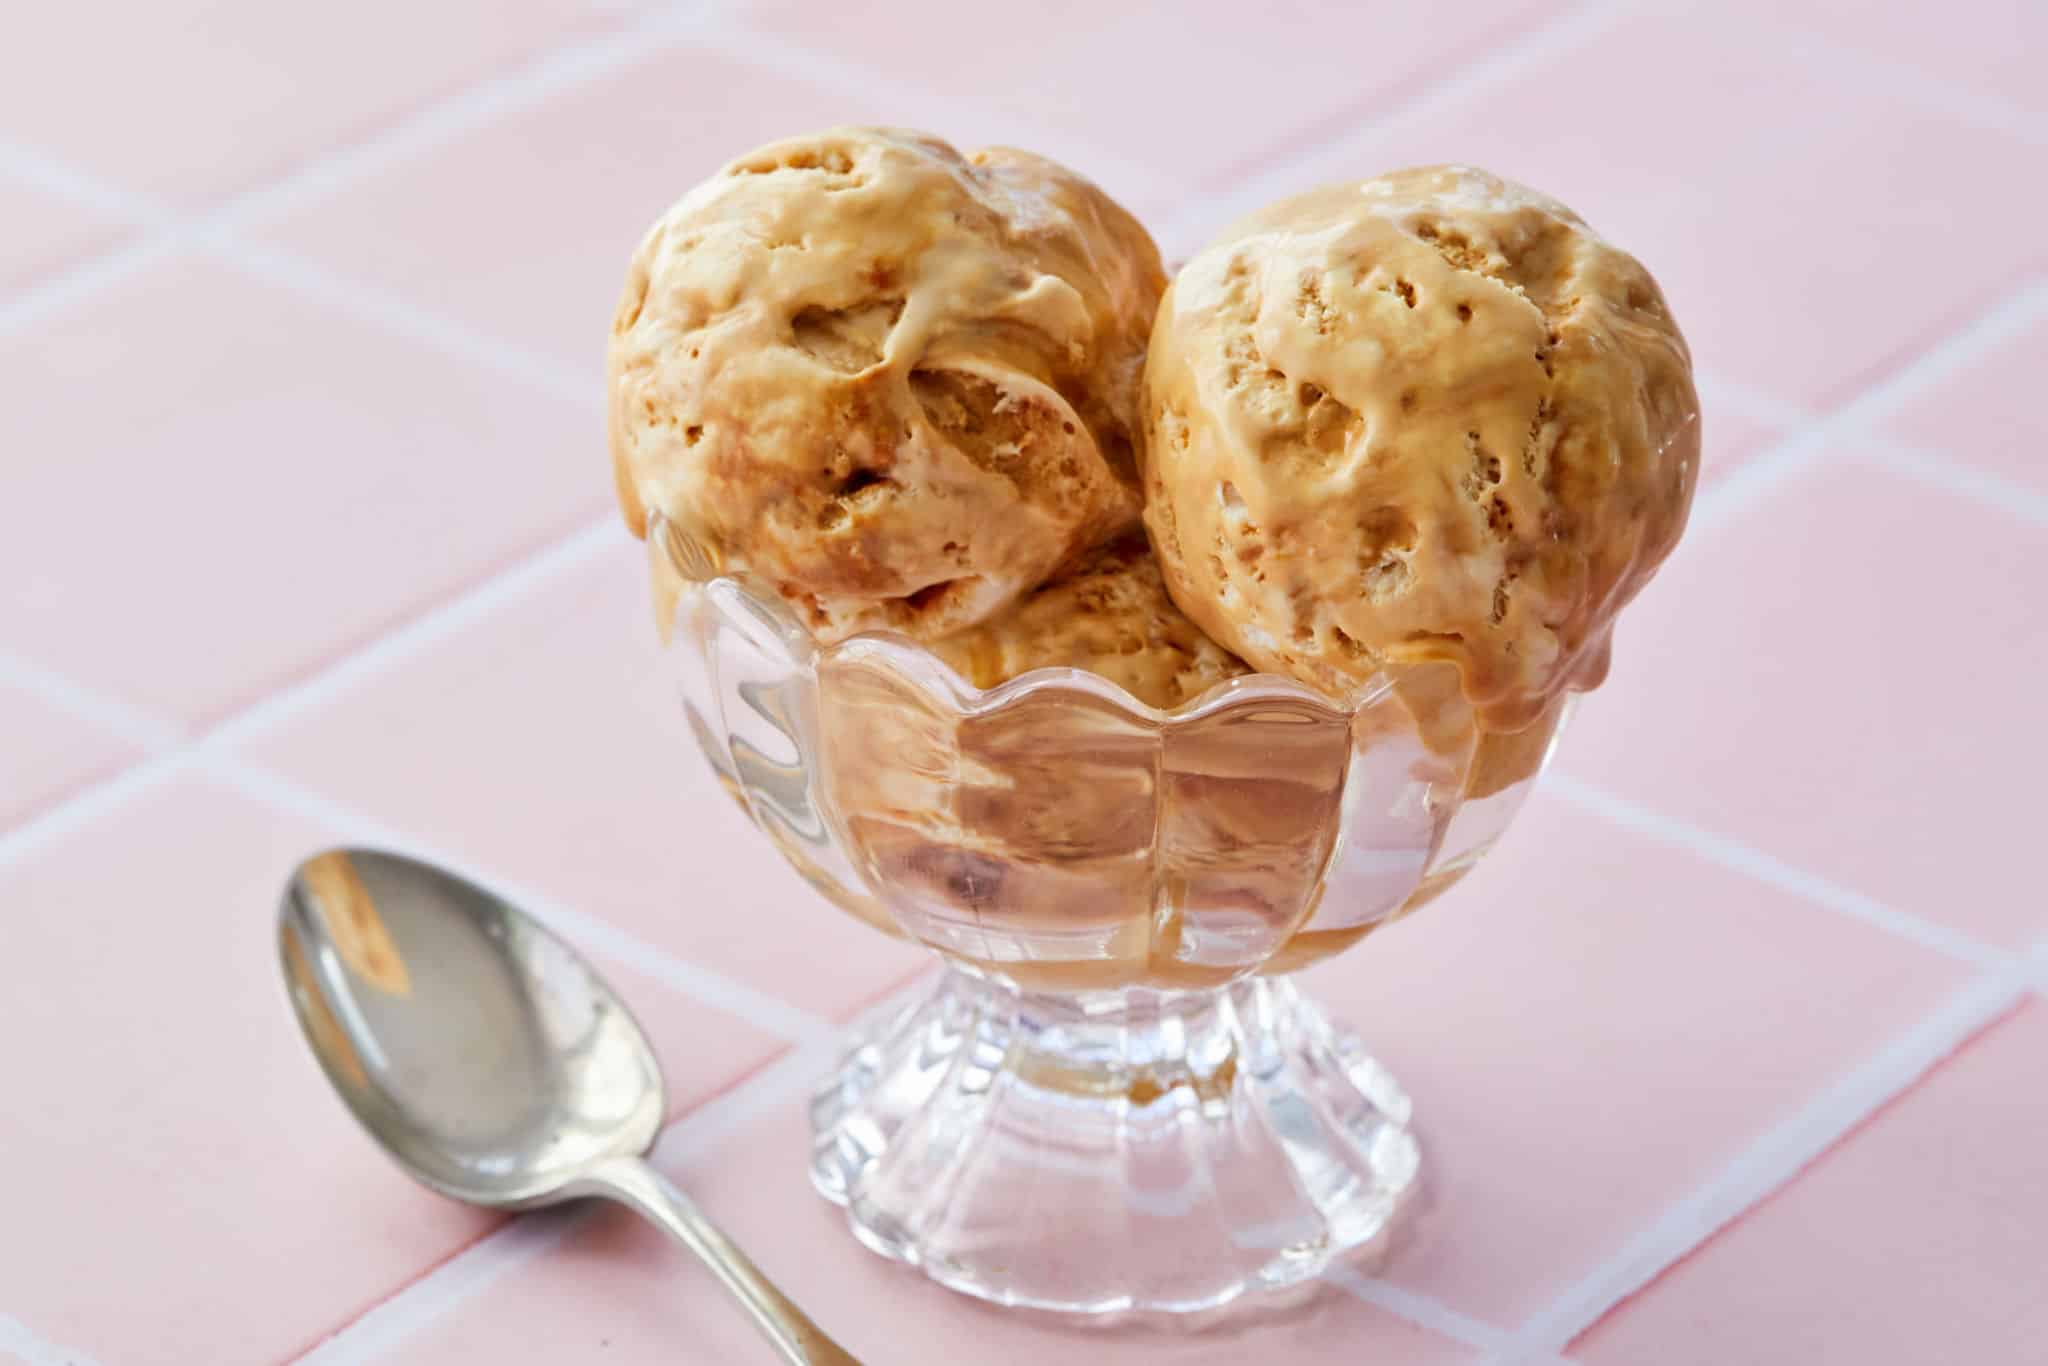 Honeycomb Ice Cream in a glass bowl